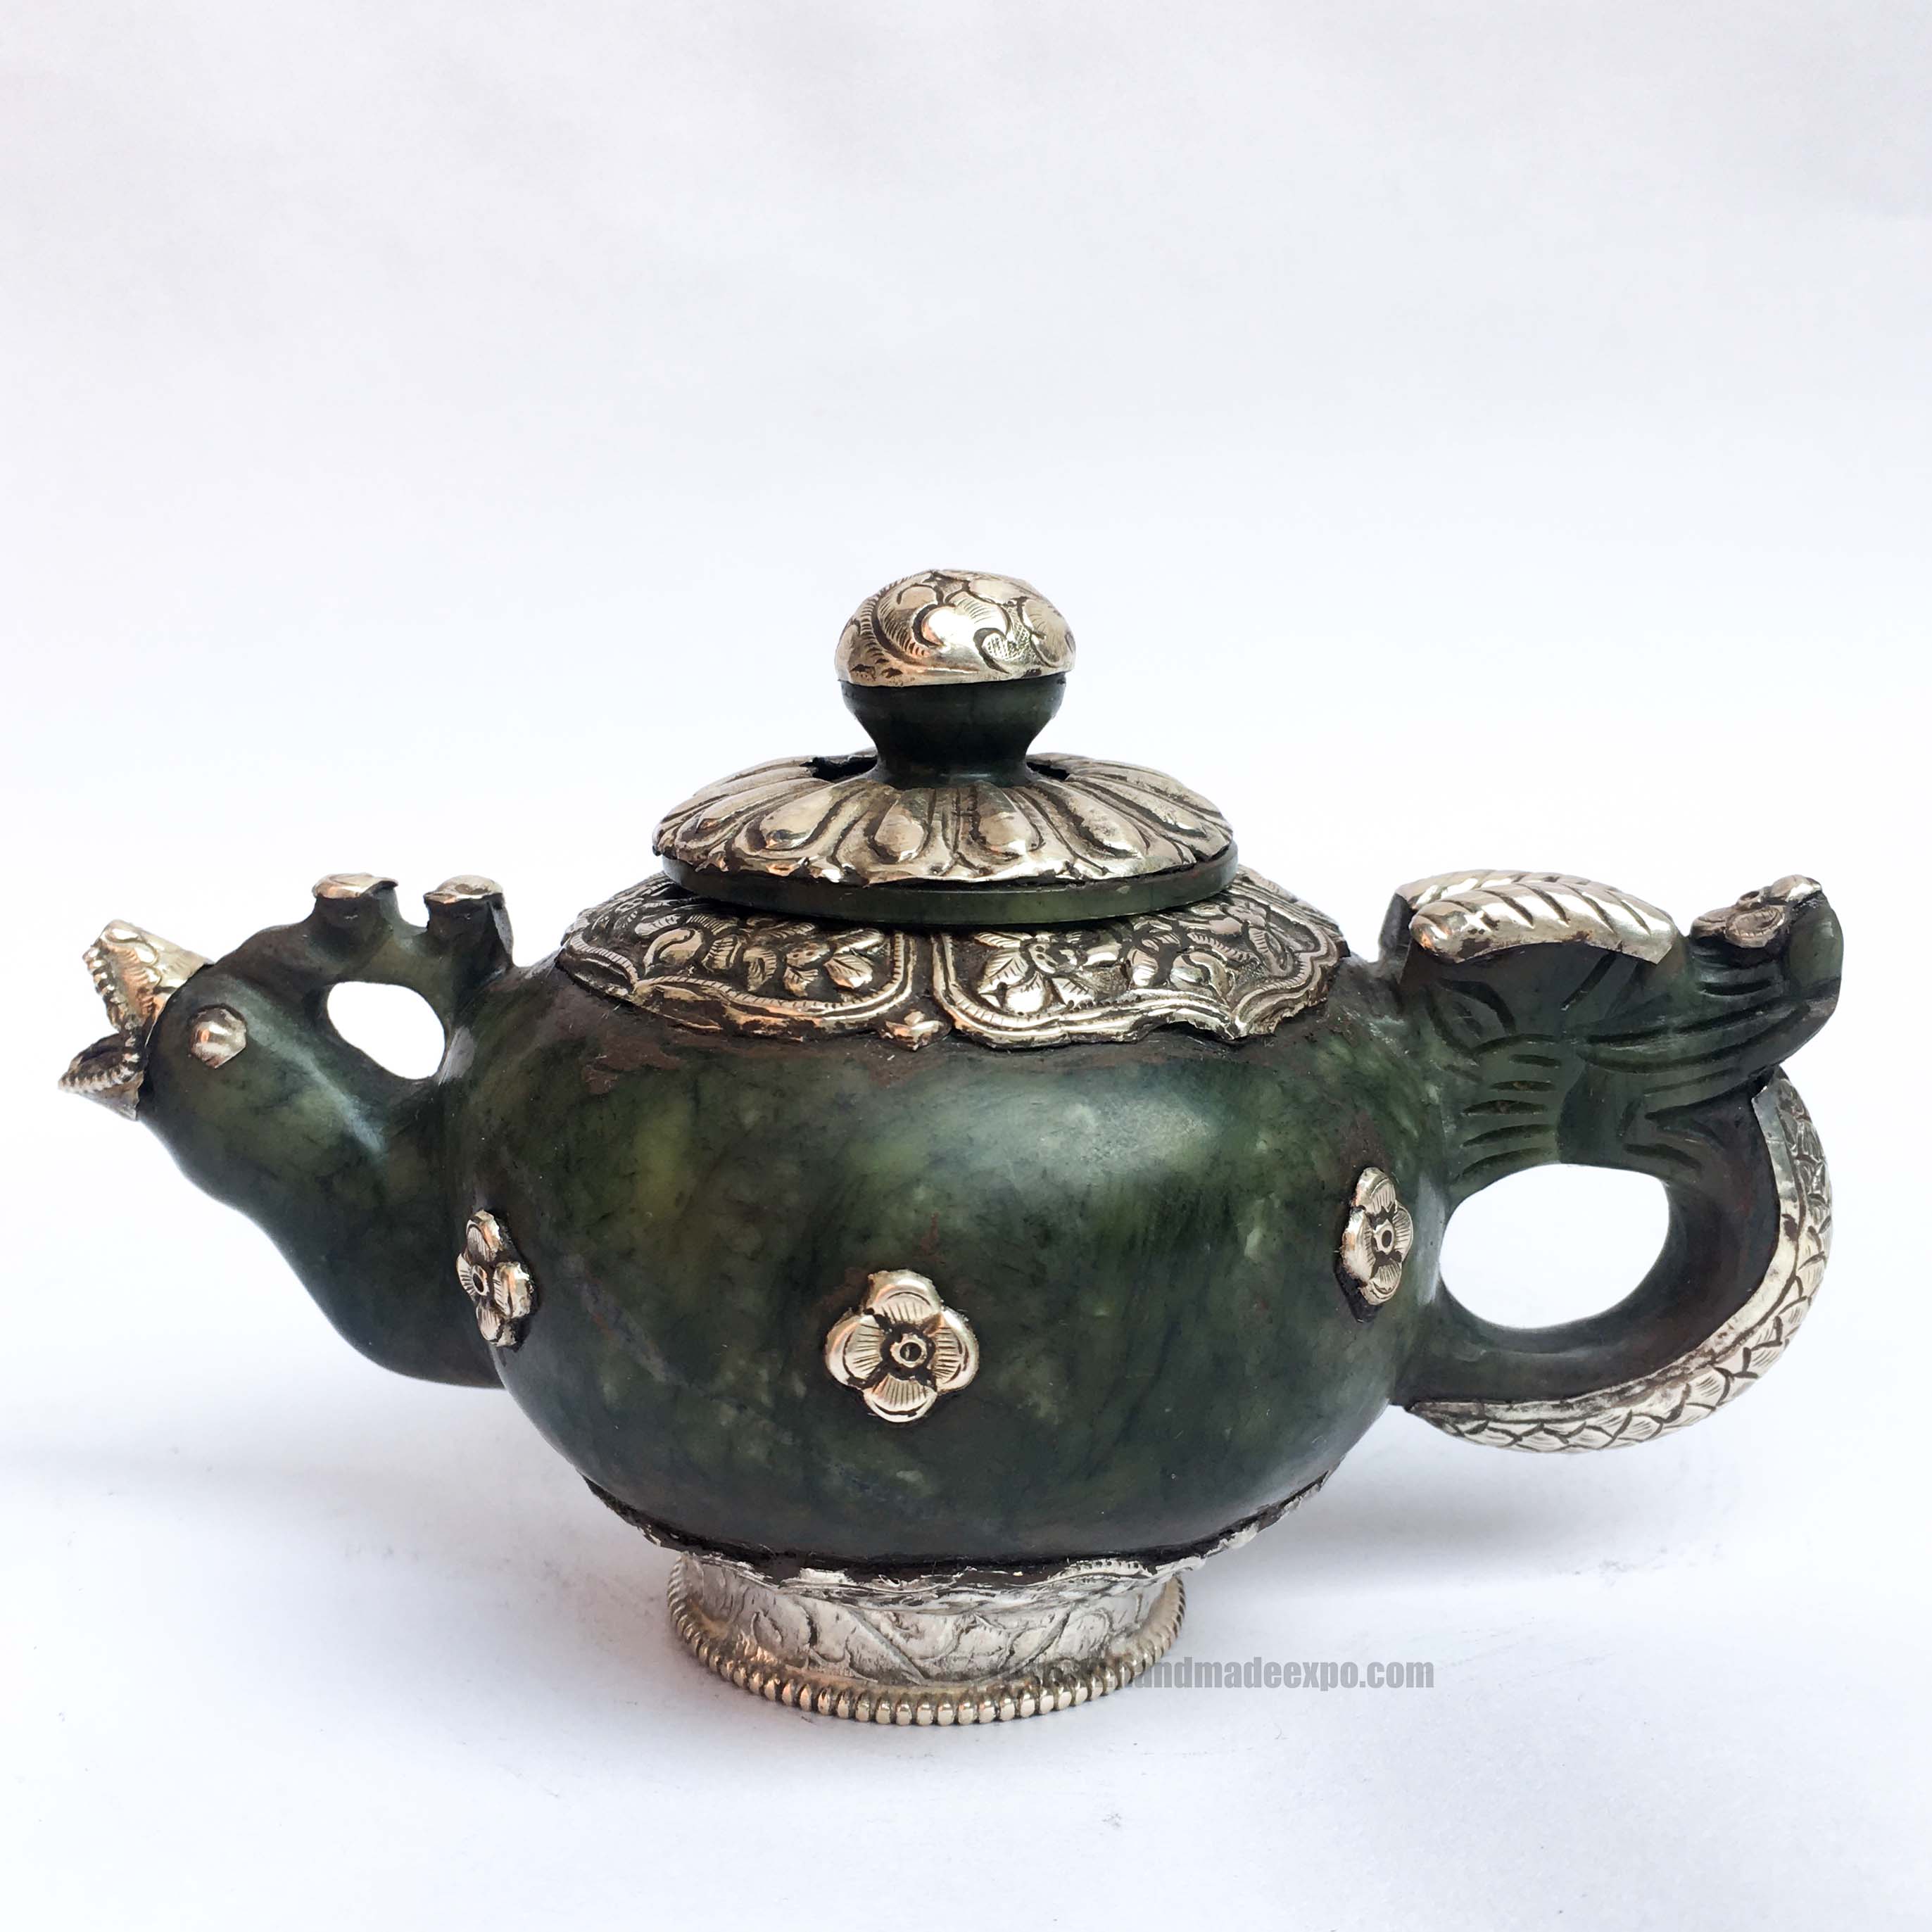 Tibetan Tea And Water Offering Vessel, Green Color, With 2 Tola Silver And Metal Siku Design, Offering Tea